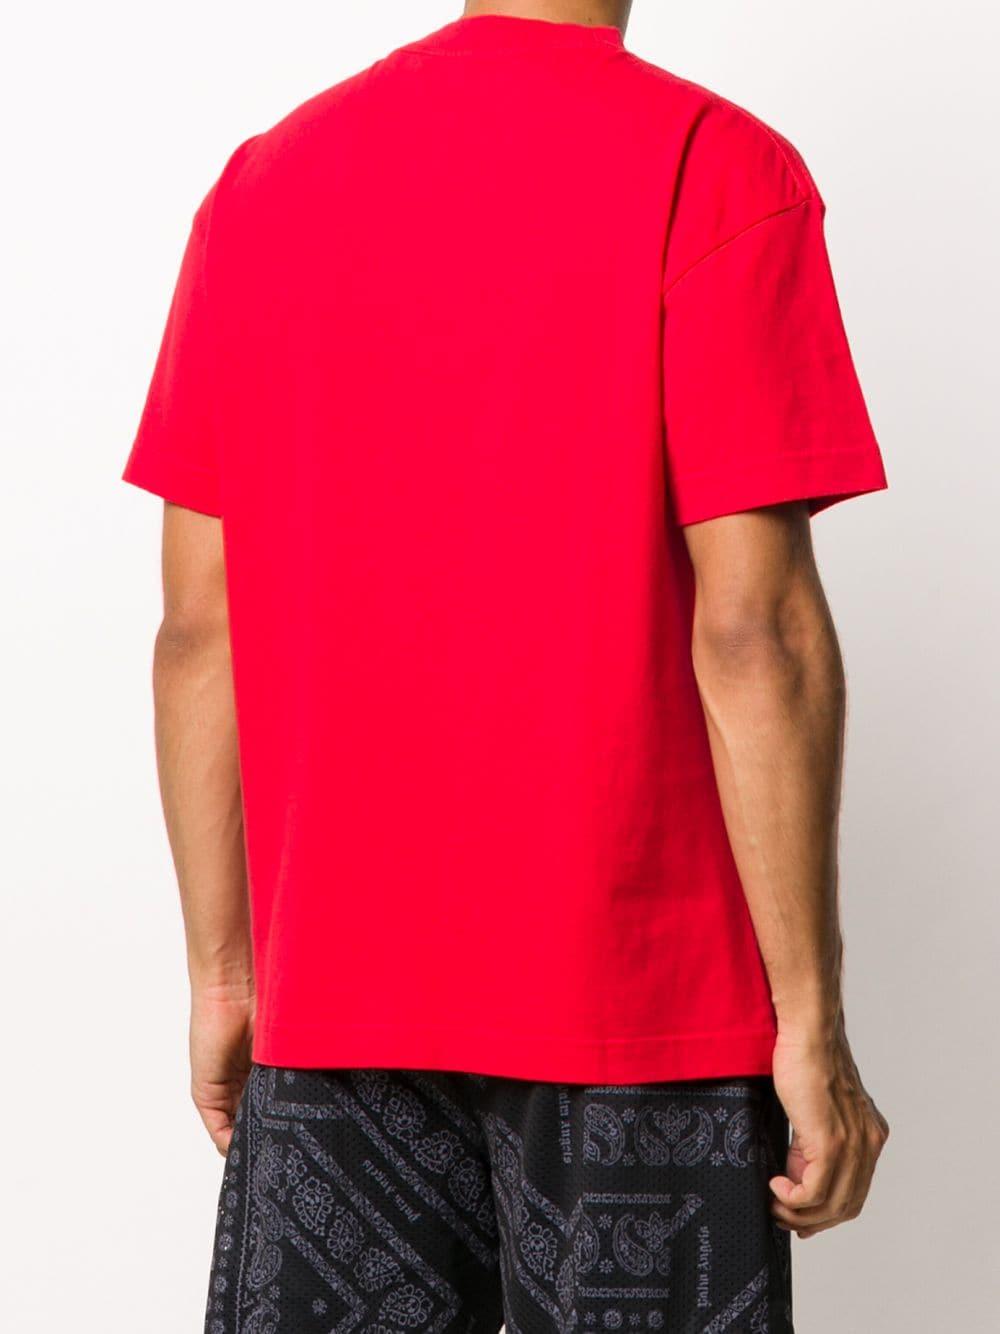 Palm Angels Cotton Las Vegas Logo-print T-shirt in Red for Men - Lyst